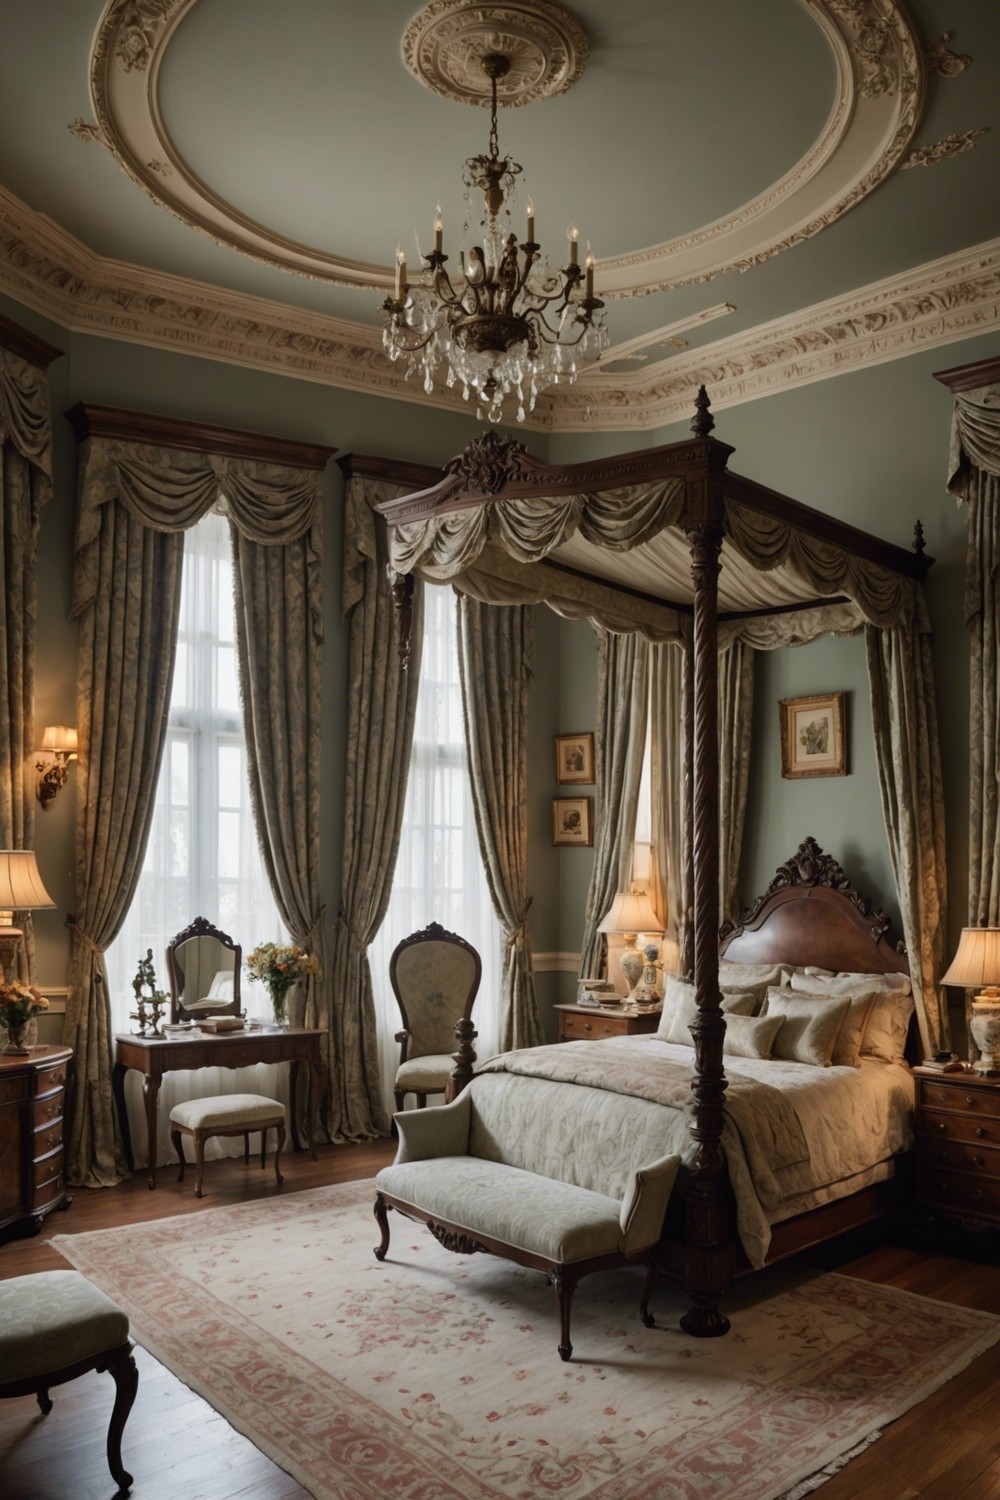 Timeless Elegance: A Bedroom That Defies Trends